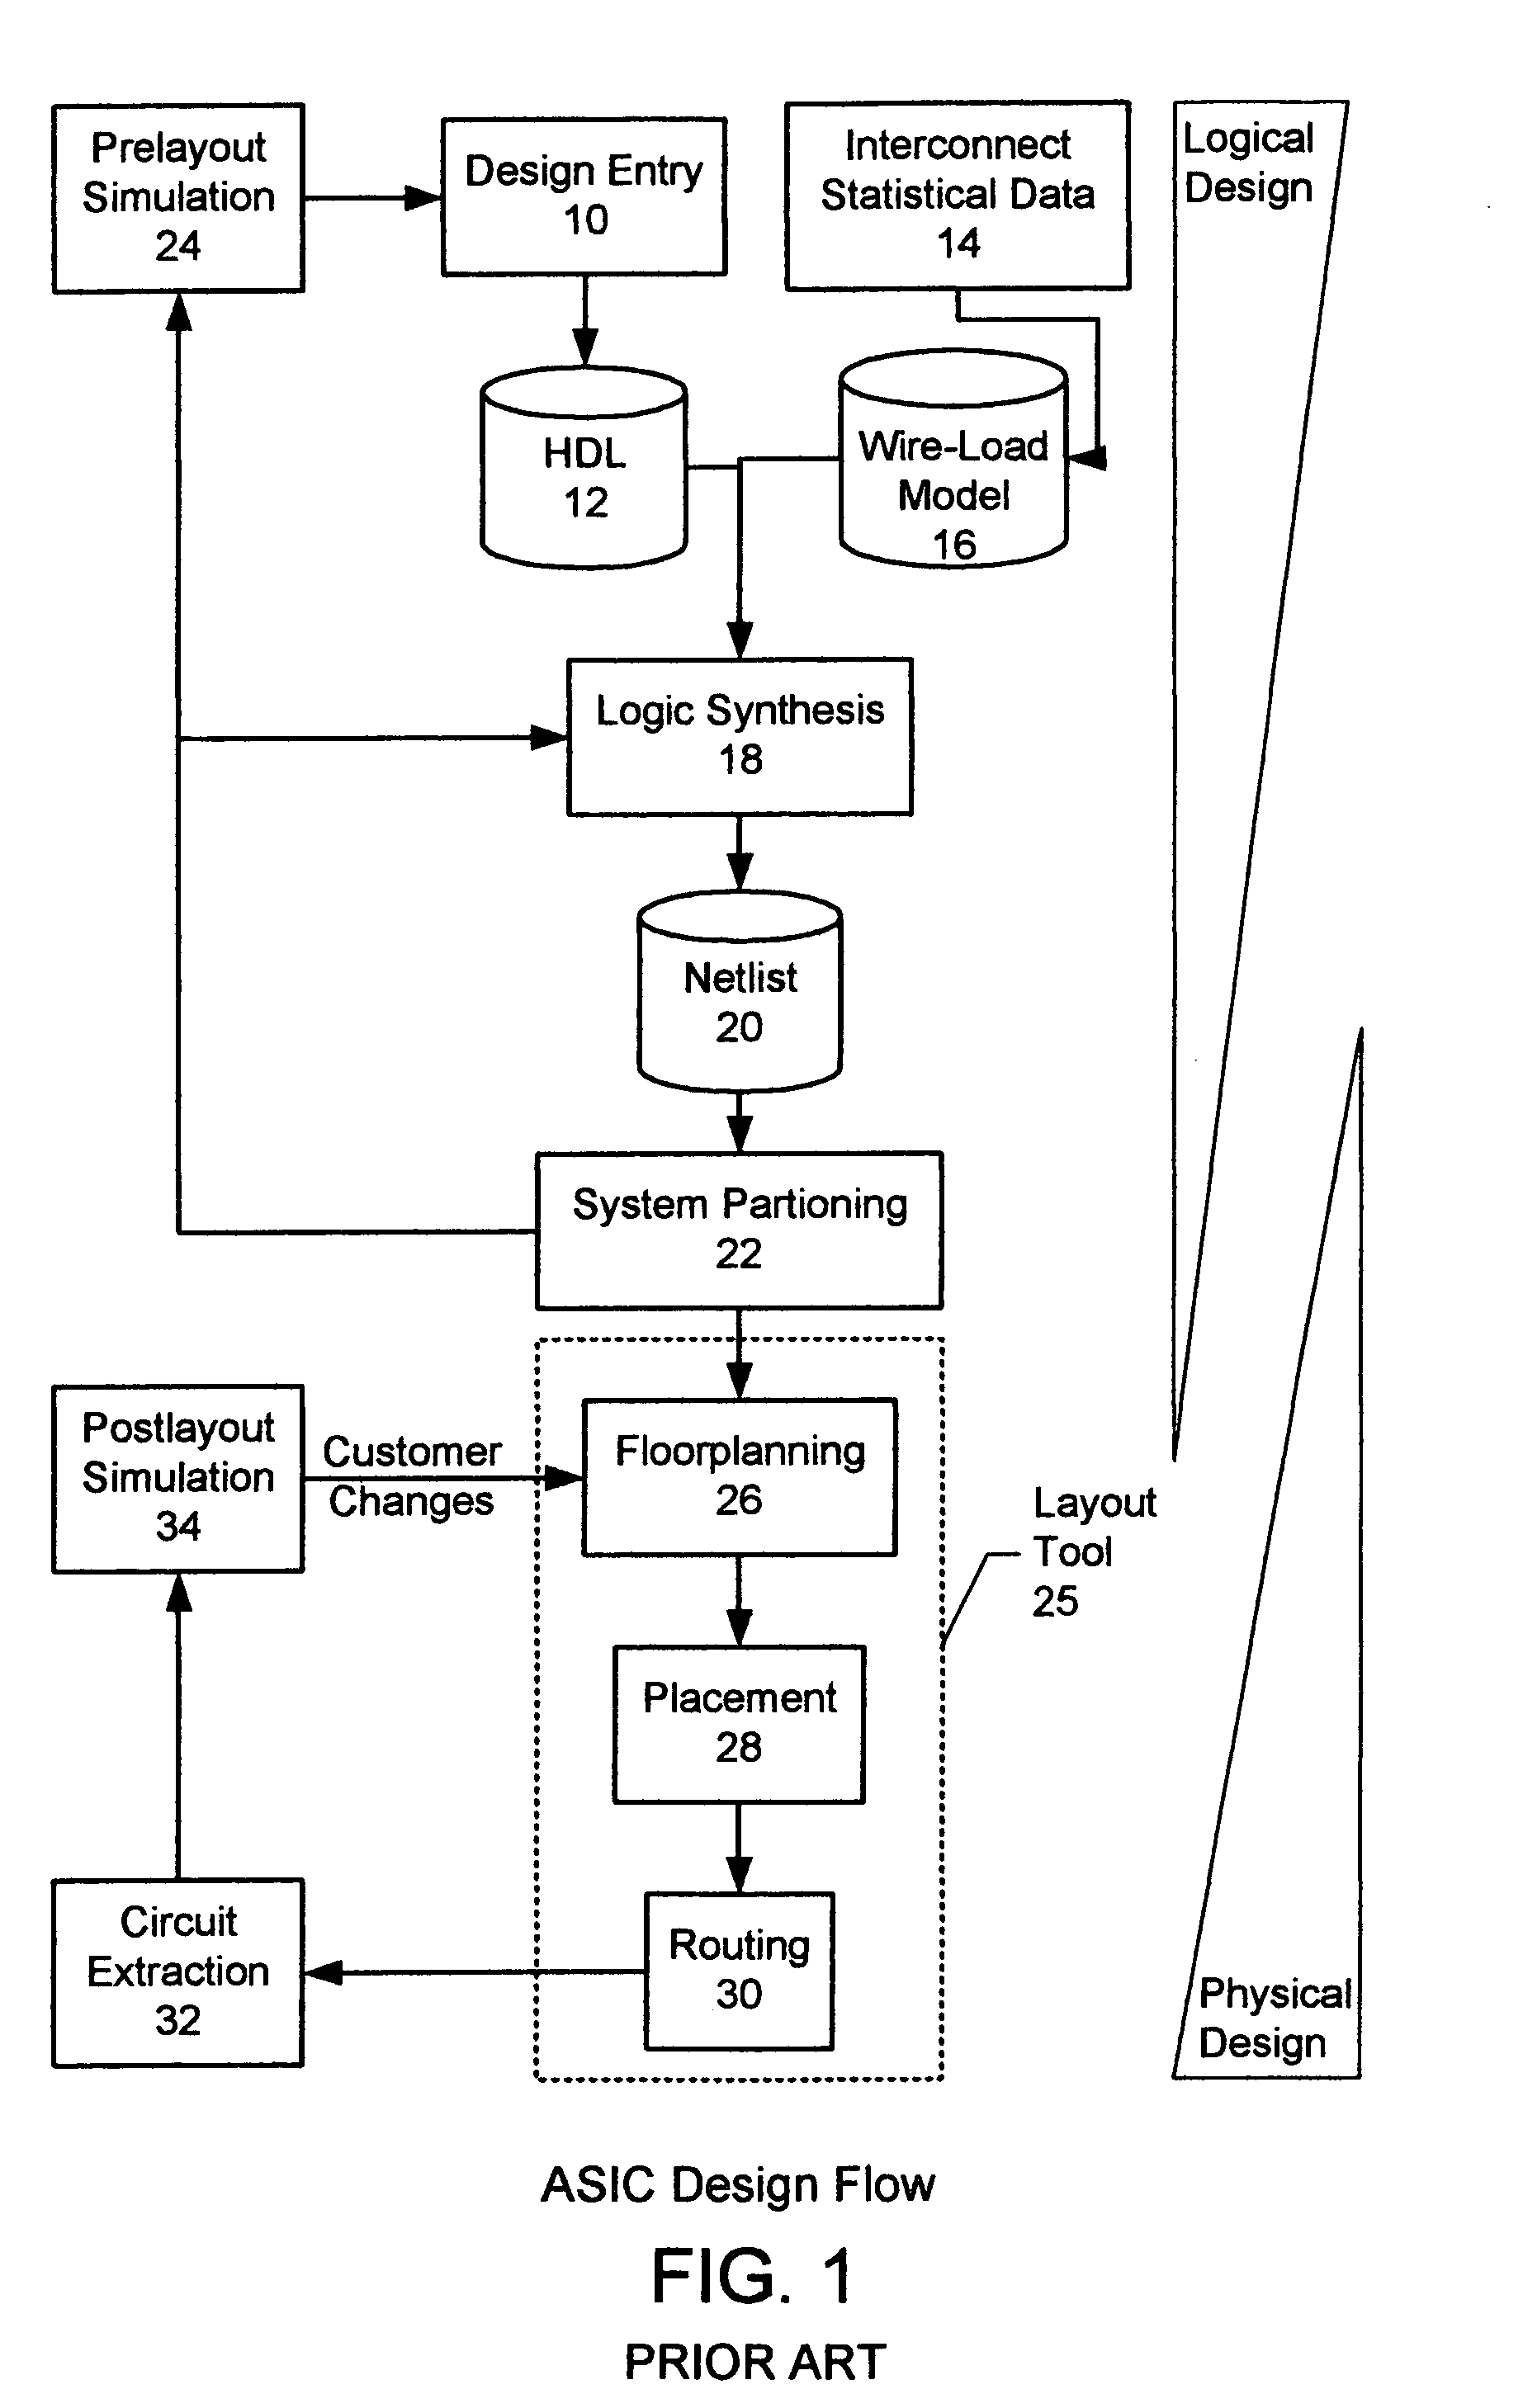 Comparison of two hierarchical netlist to generate change orders for updating an integrated circuit layout